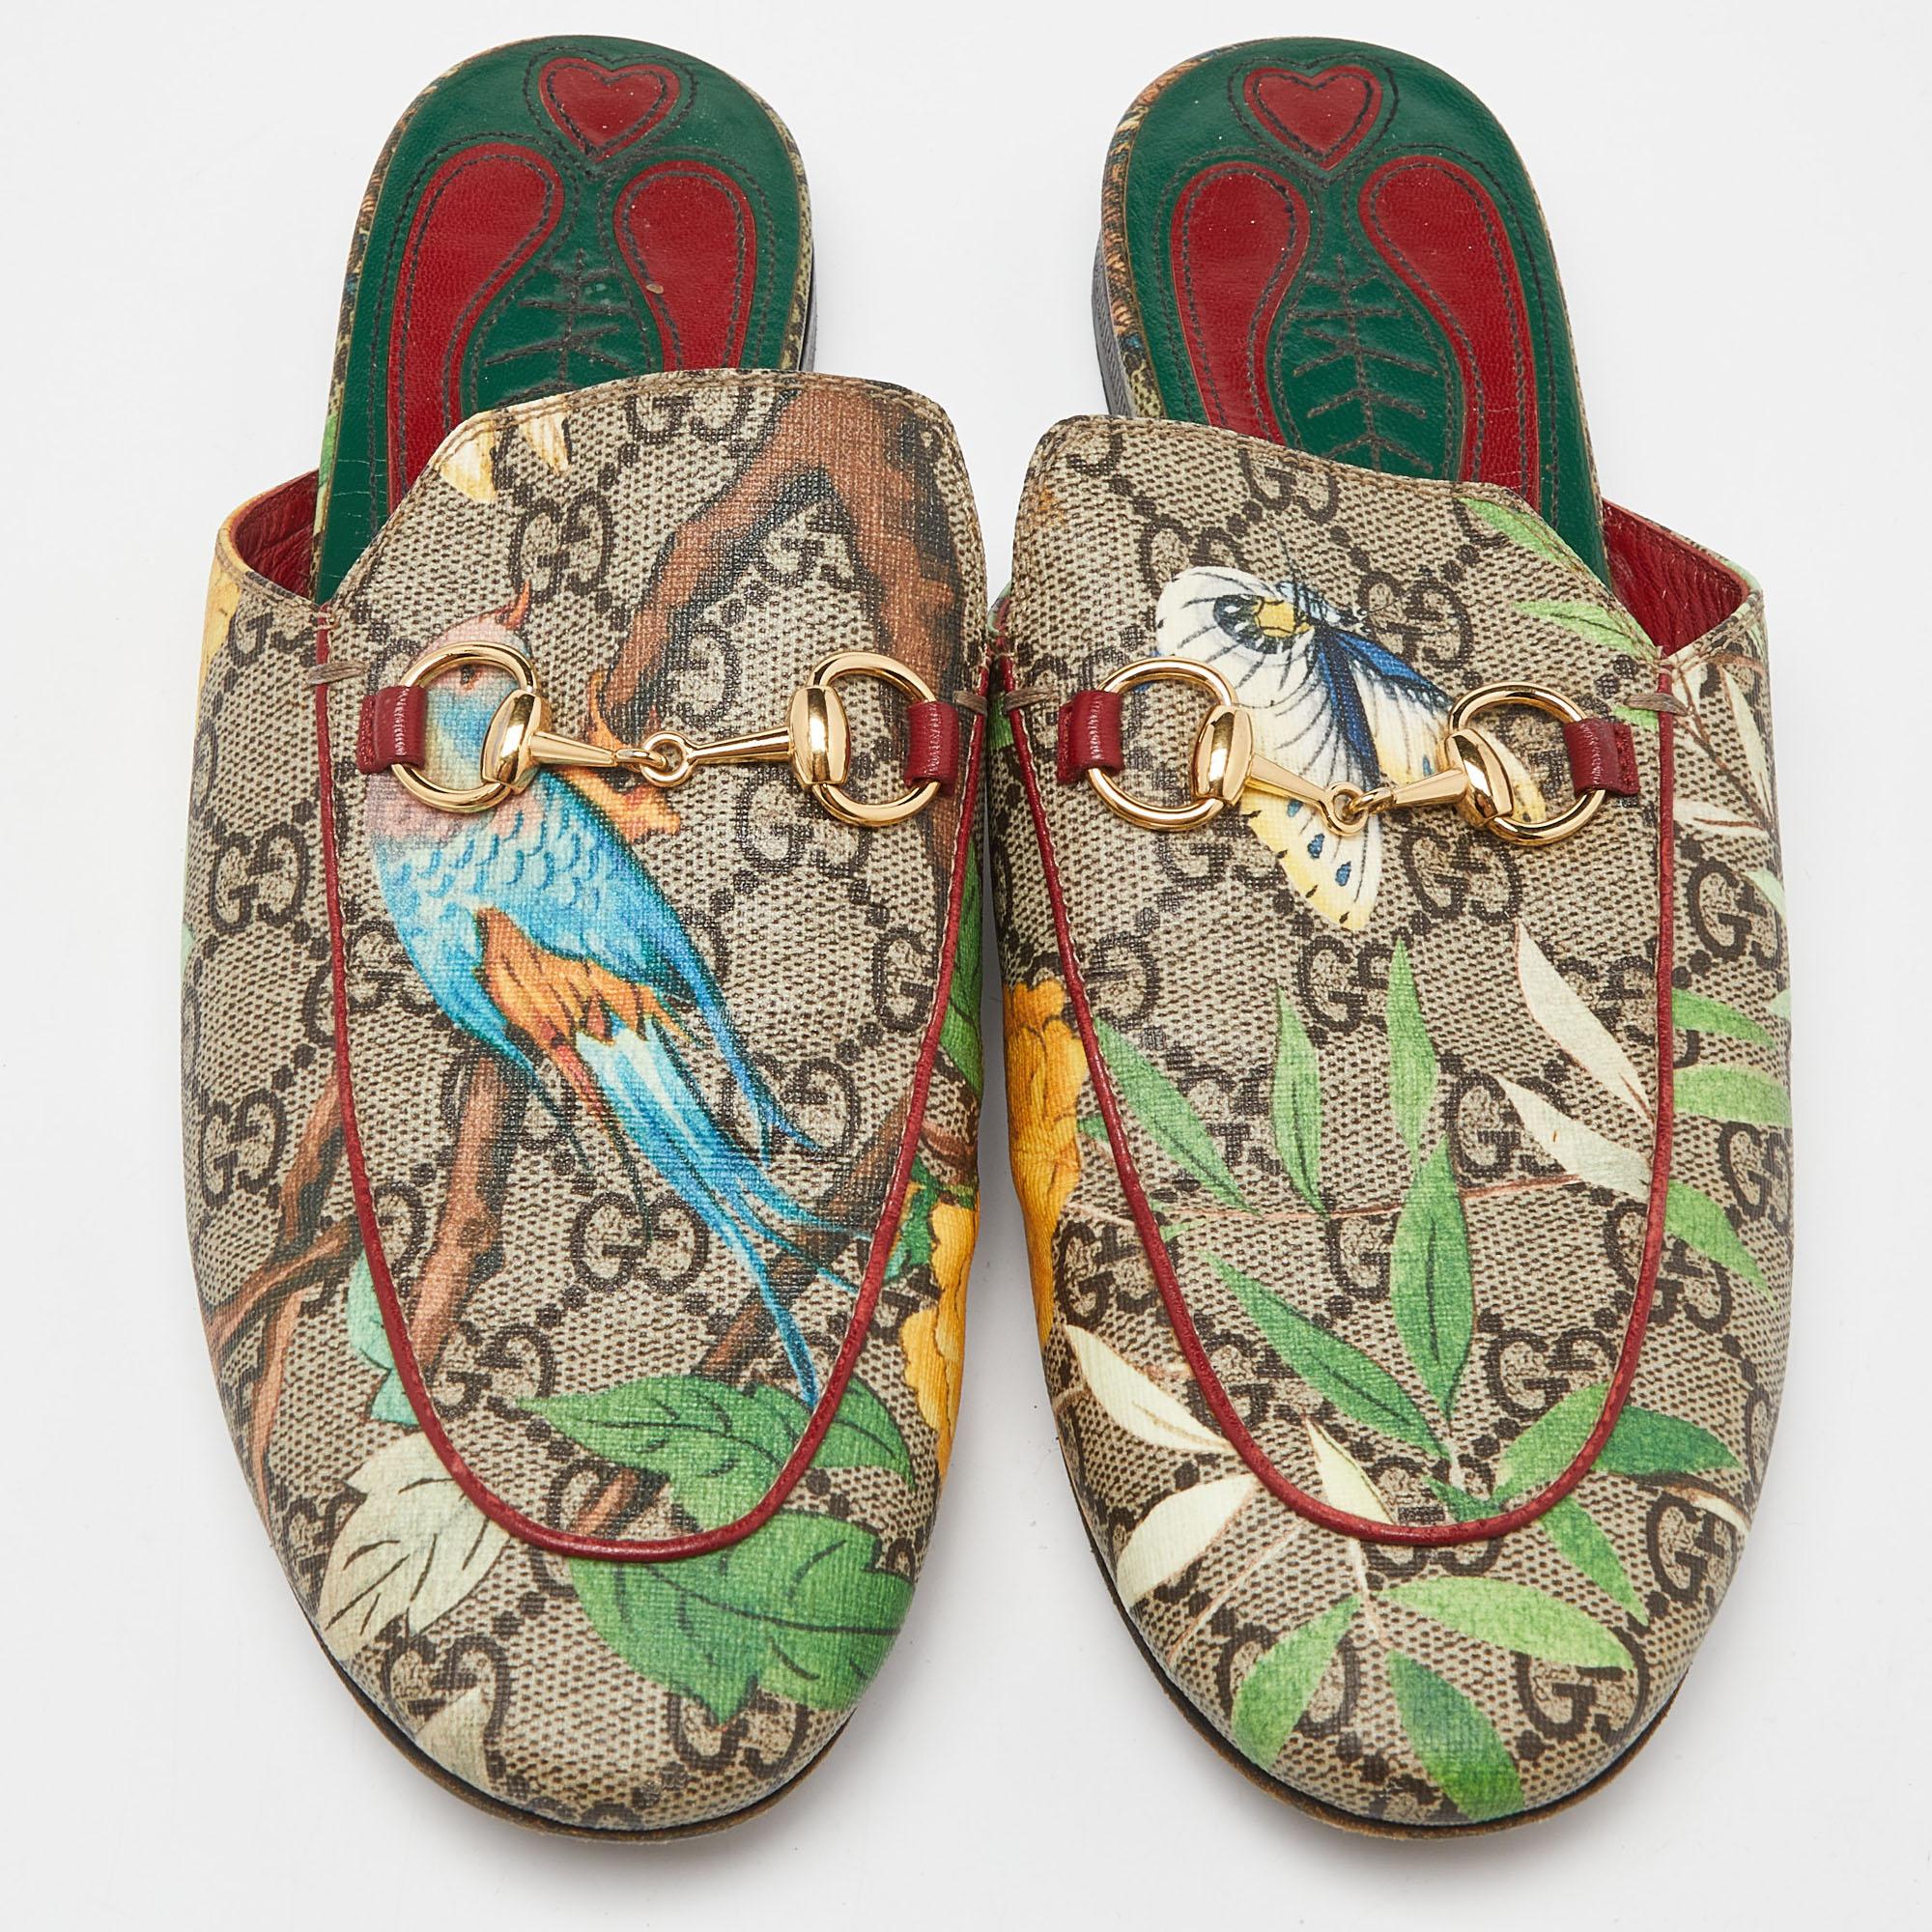 These Gucci Princetown mules signify luxury and practicality. An ultimate favorite of style enthusiasts, its silhouette gets a luxe update with the Horsebit motif on the uppers, and its charm is enhanced with Tian print.

Includes
Original Dustbag